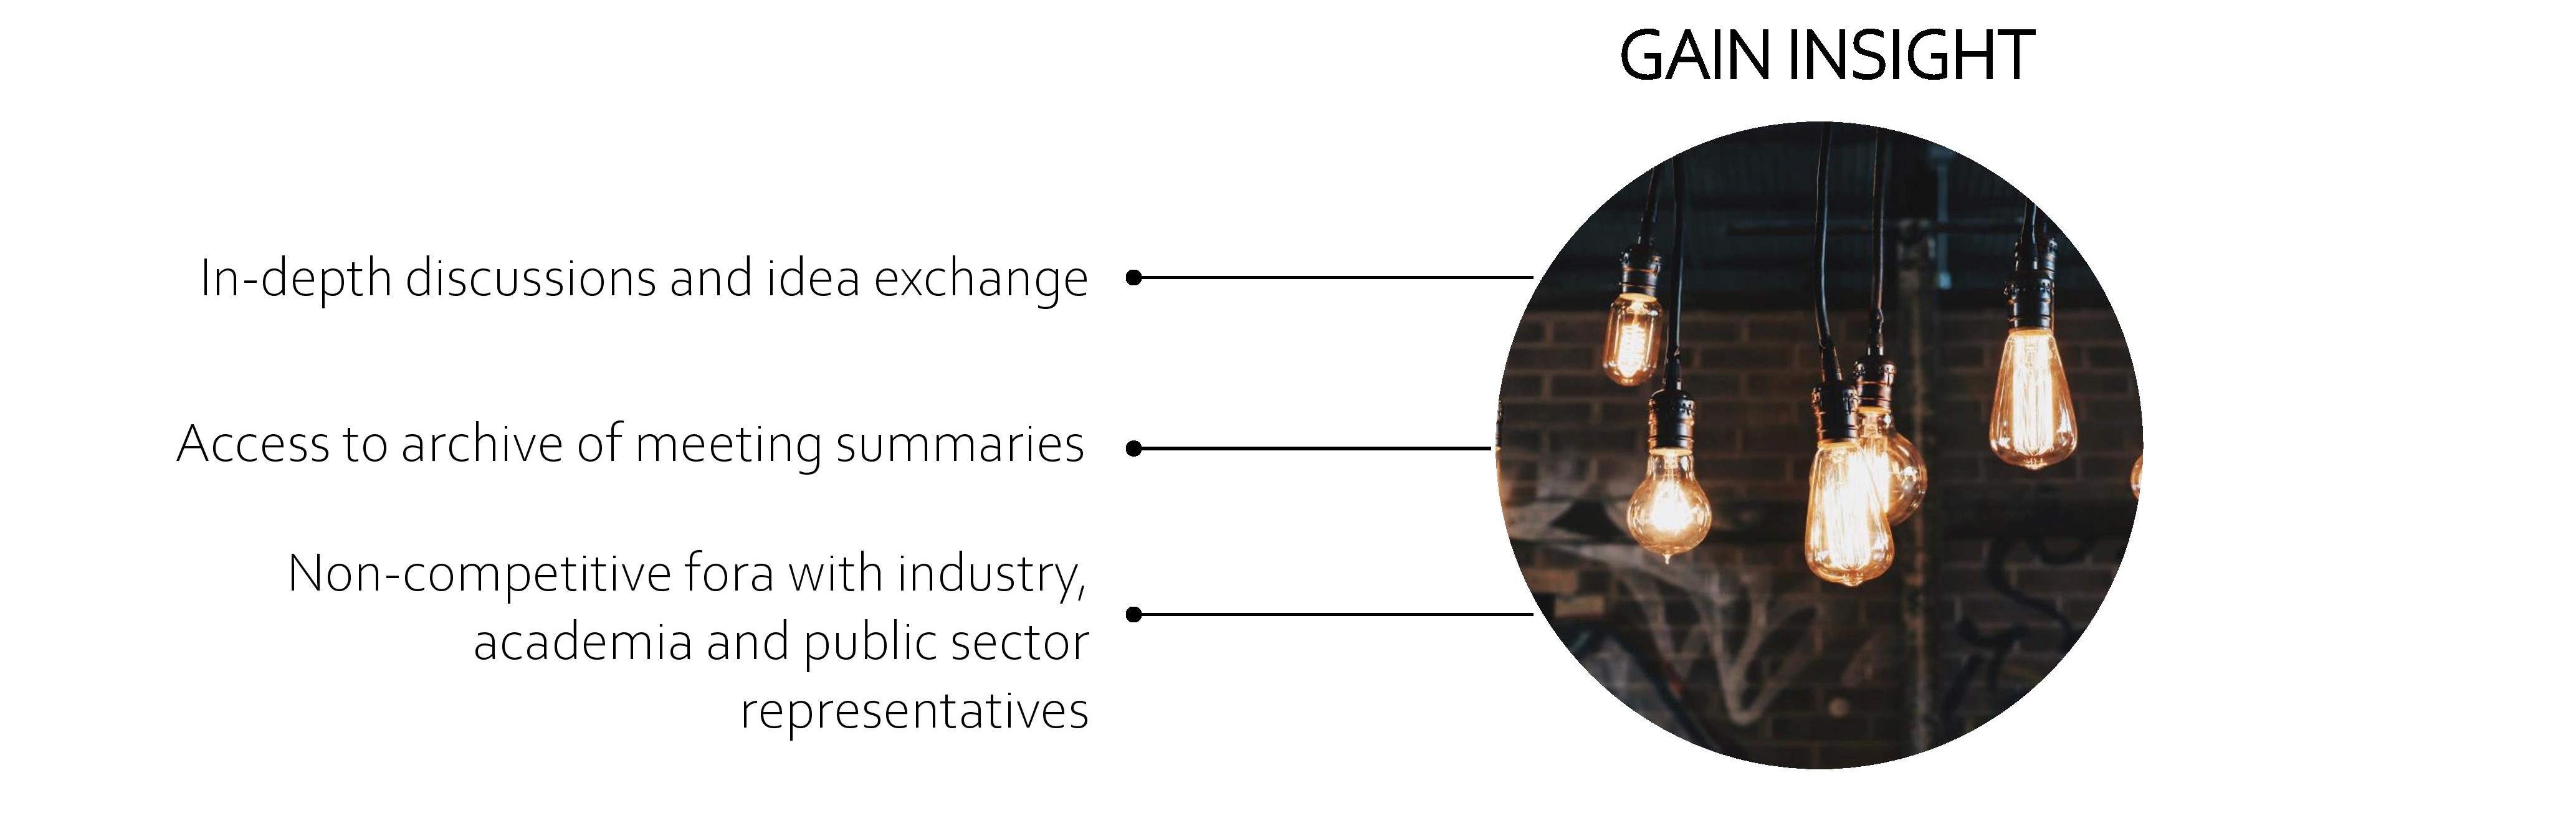 GAIN INSIGHT. In-depth discussions and idea exchange. Access to archive of meeting summaries. Non-competitive fora with industry, academia and public sector representatives